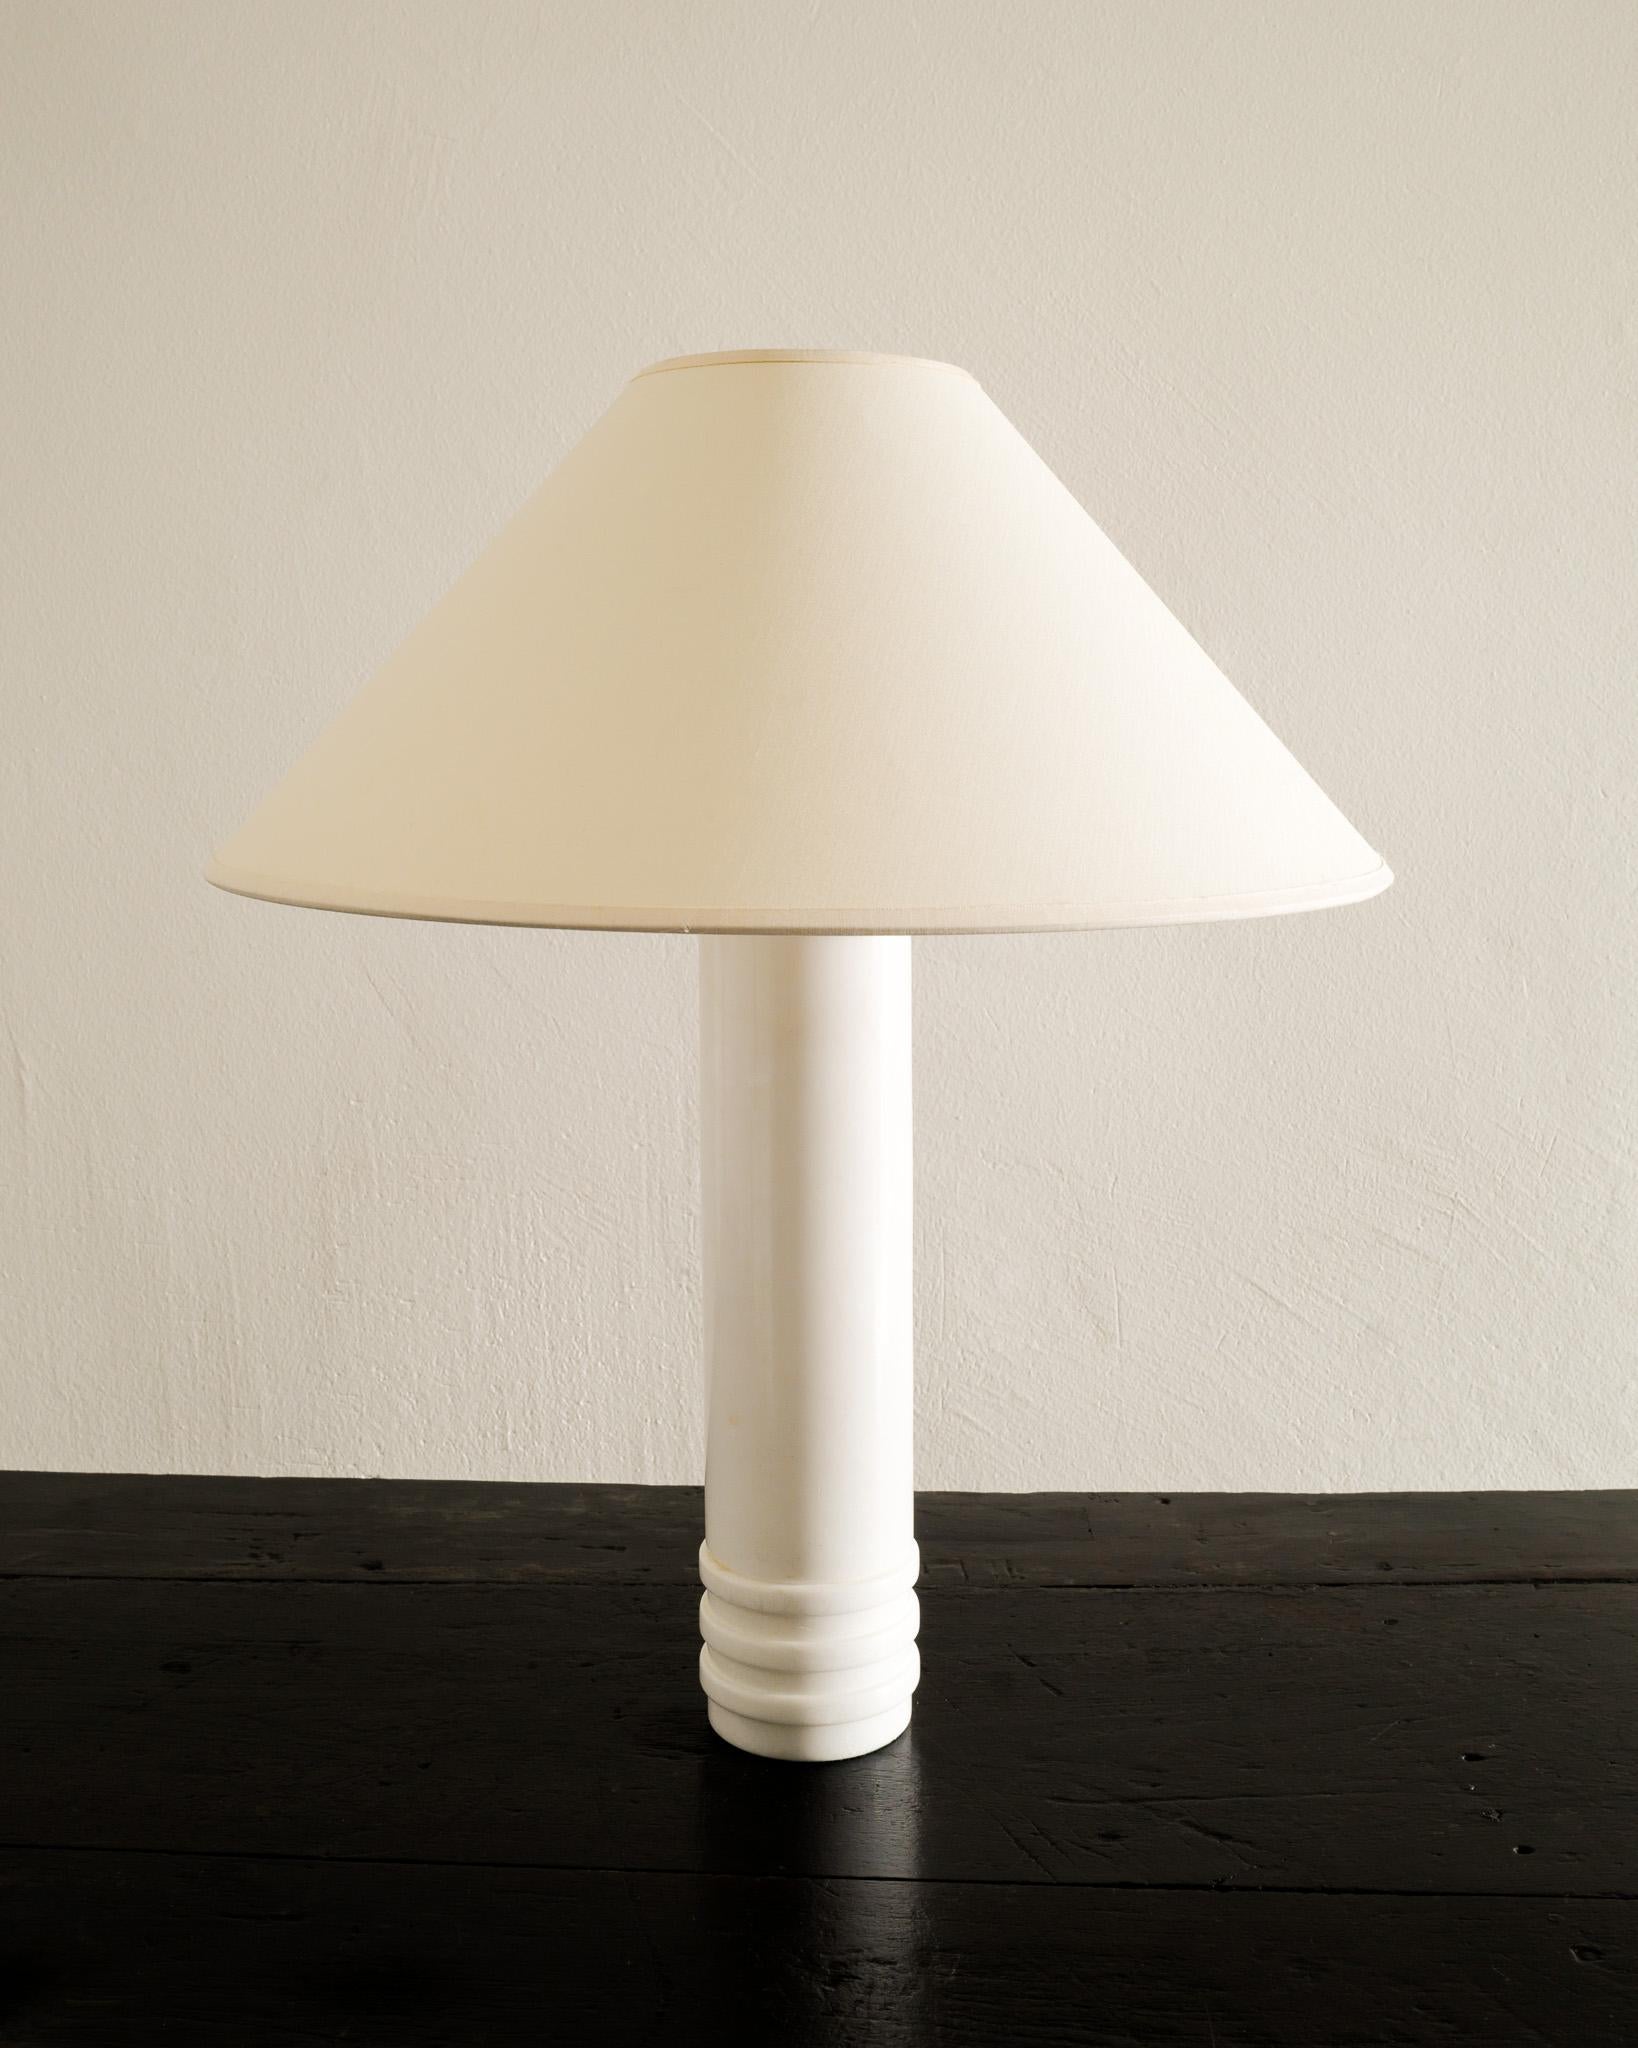 Rare Swedish mid century cylinder table / bed lamp in solid white marble produced by Bergboms Sweden 1960s. In good original condition. 

Dimensions: H: 34 cm / 13.4